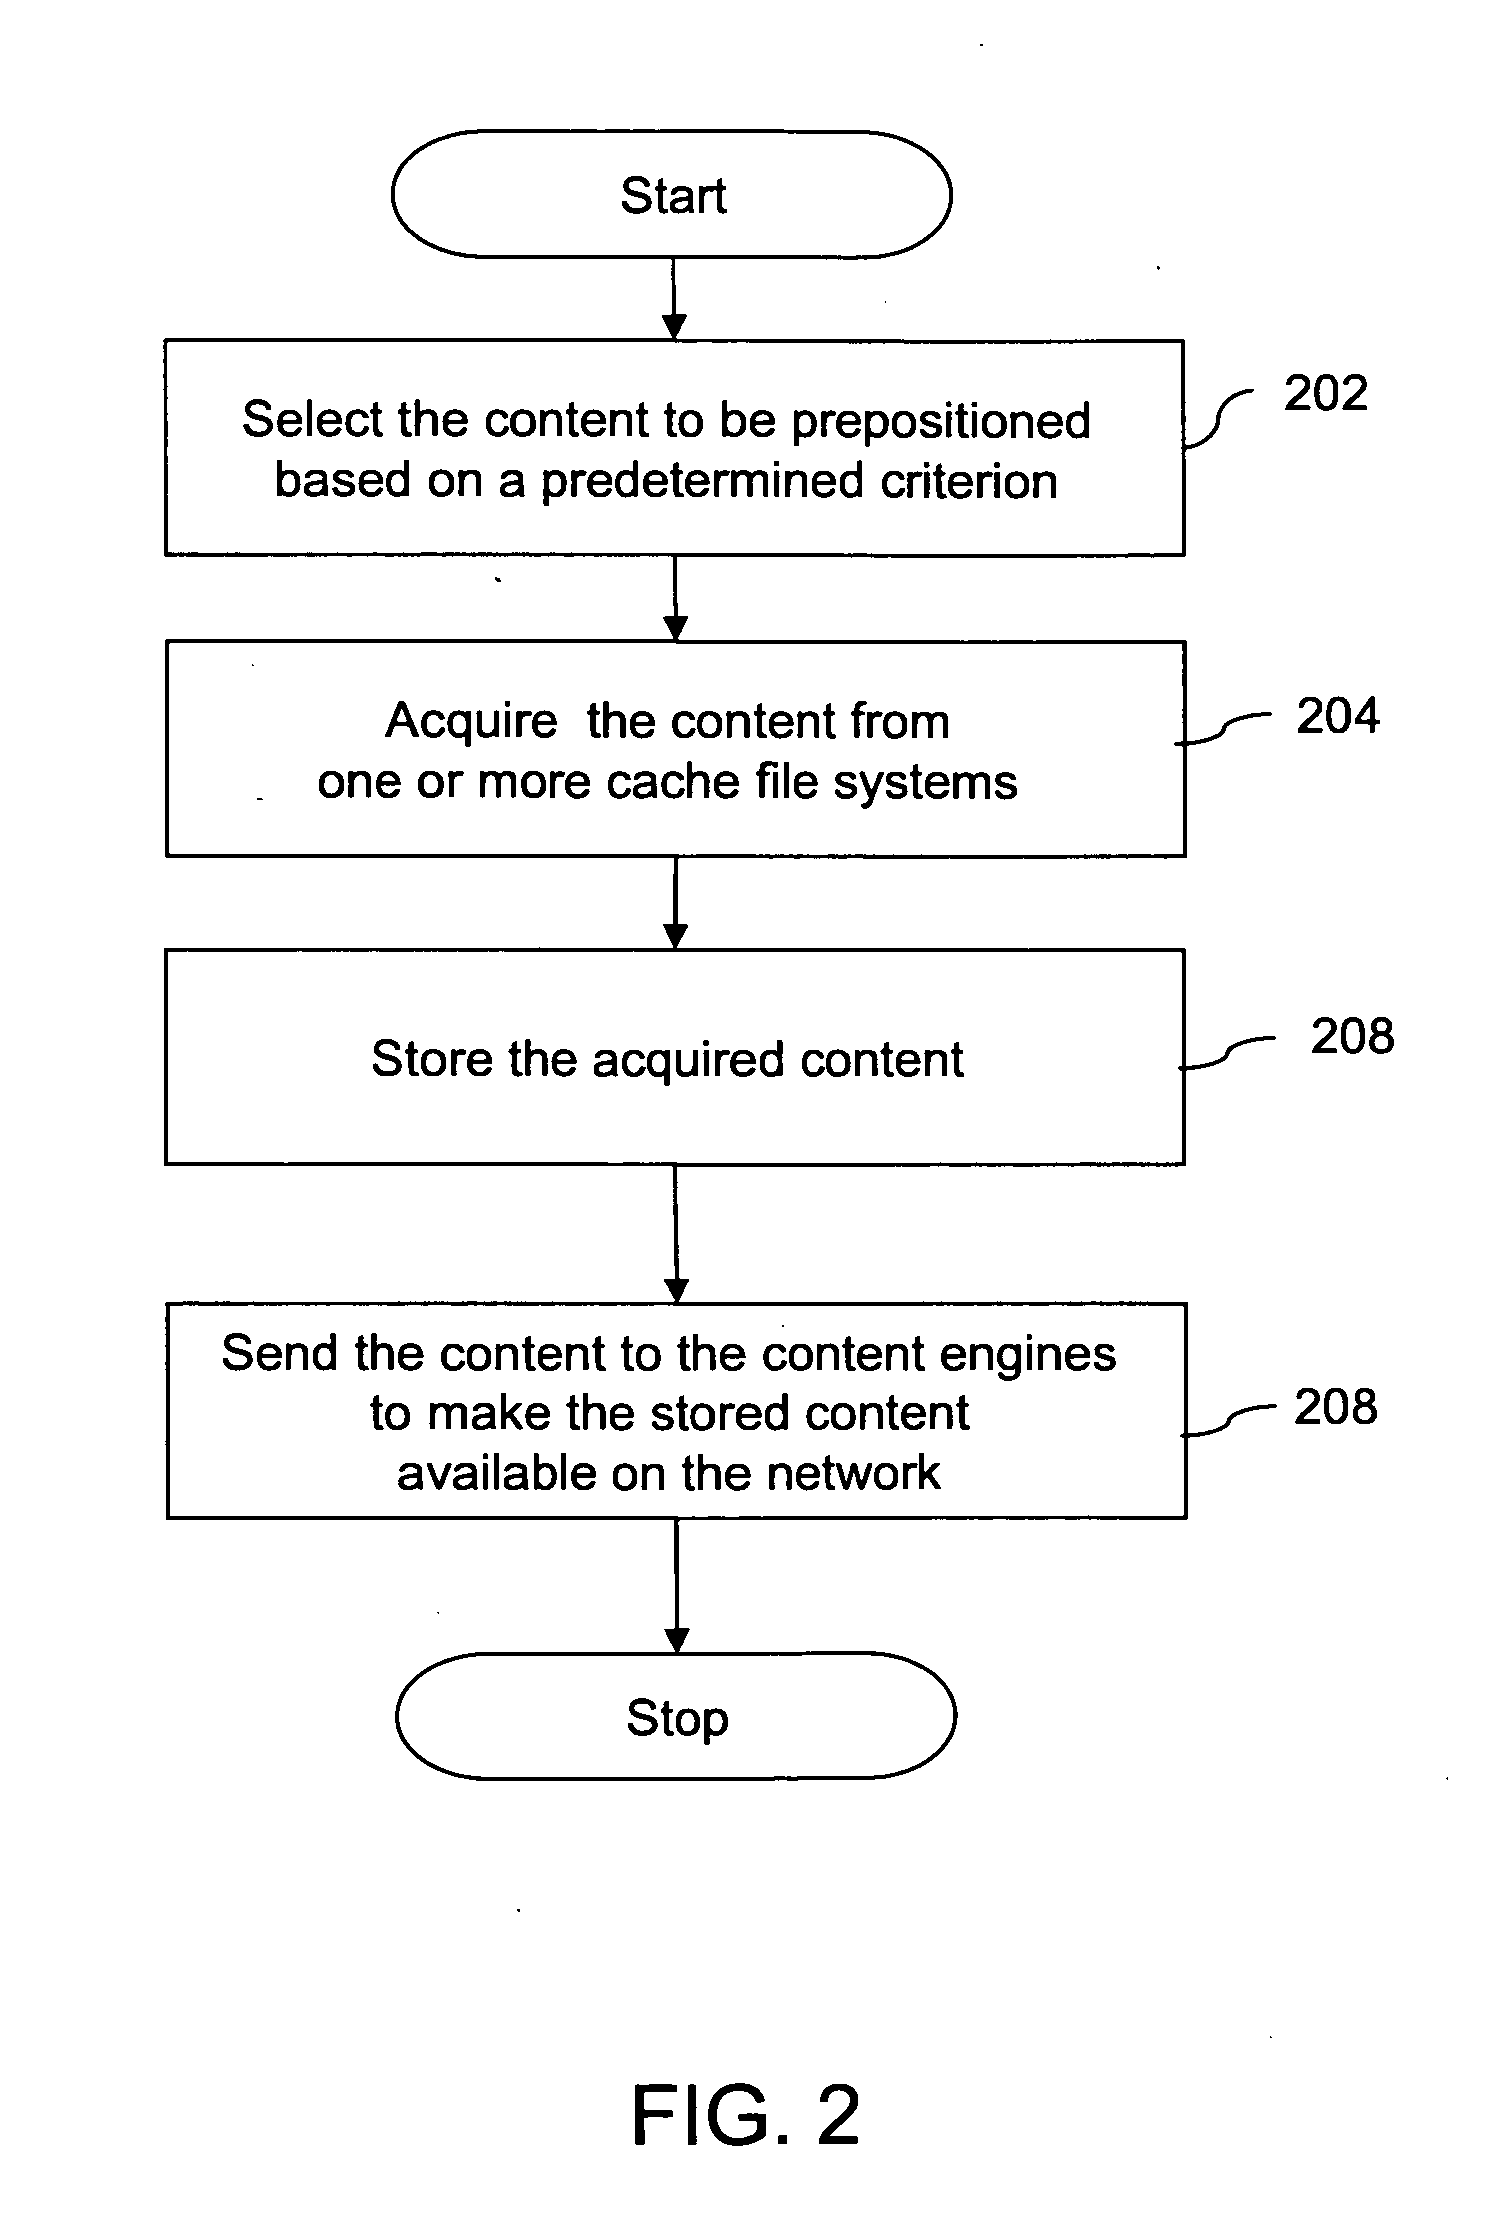 Methods and system for prepositioning frequently accessed web content